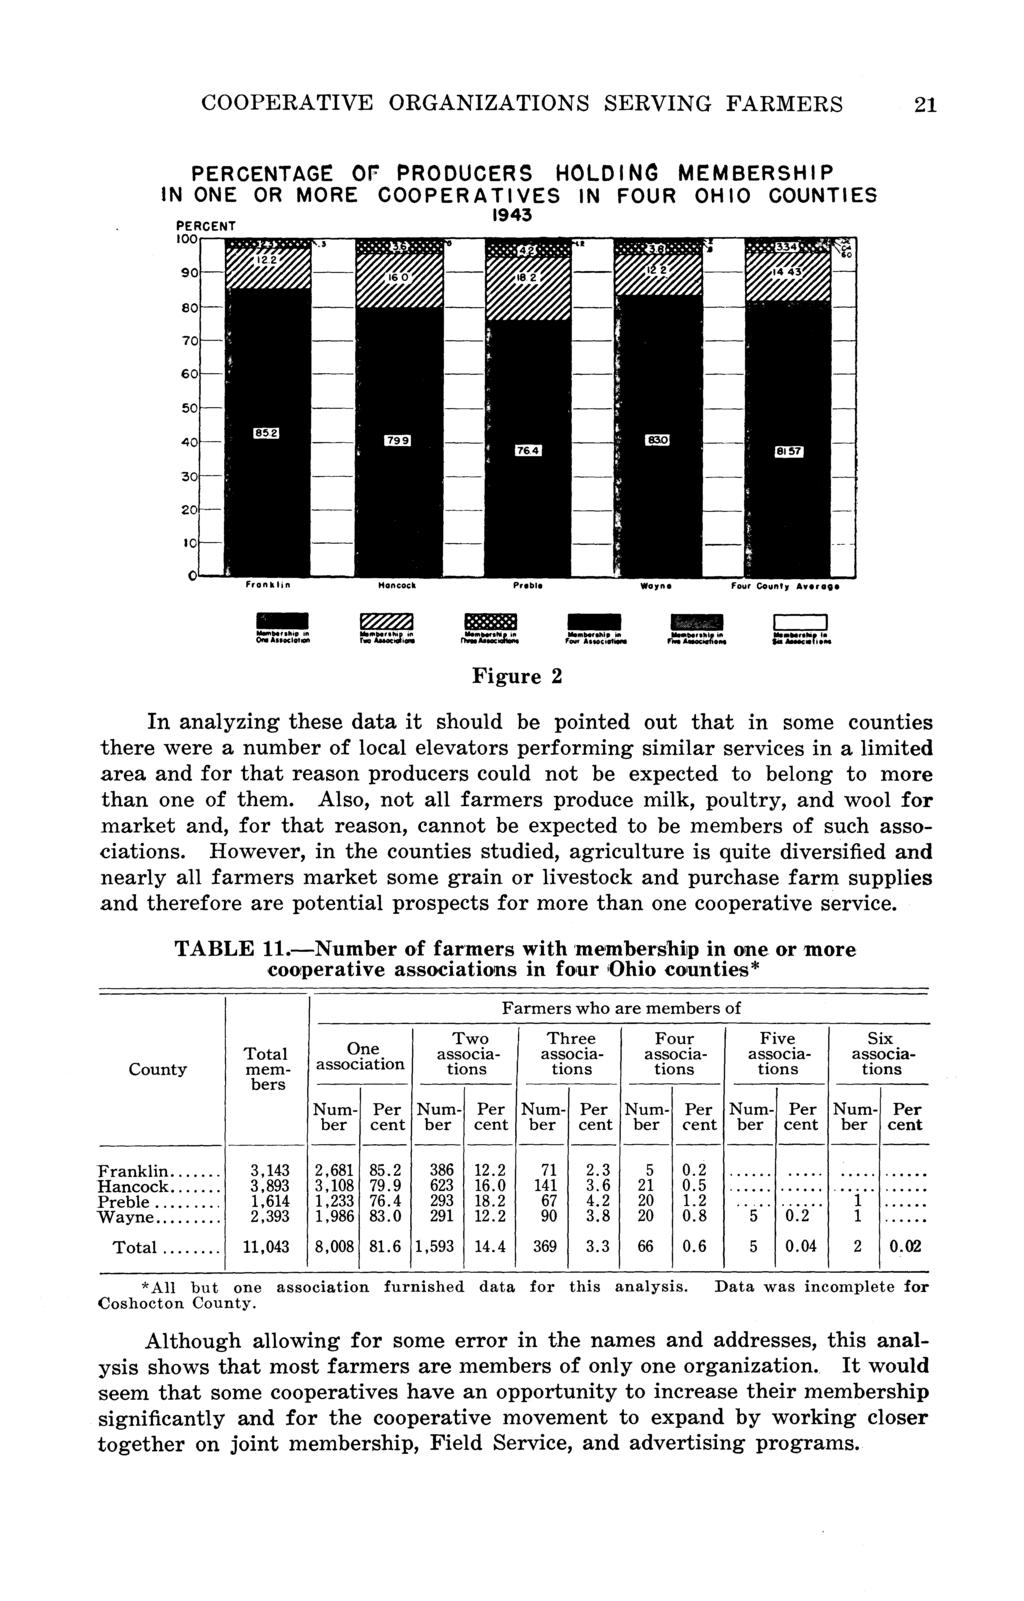 COOPERATIVE ORGANIZATIONS SERVING FARMERS 21 PERCENTAGE Or PRODUCERS HOLDING MEMBERSHIP IN ONE OR MORE COOPERATIVES IN FOUR OH 10 COUNTIES 1943 Figure 2 In analyzing these data it should be pointed